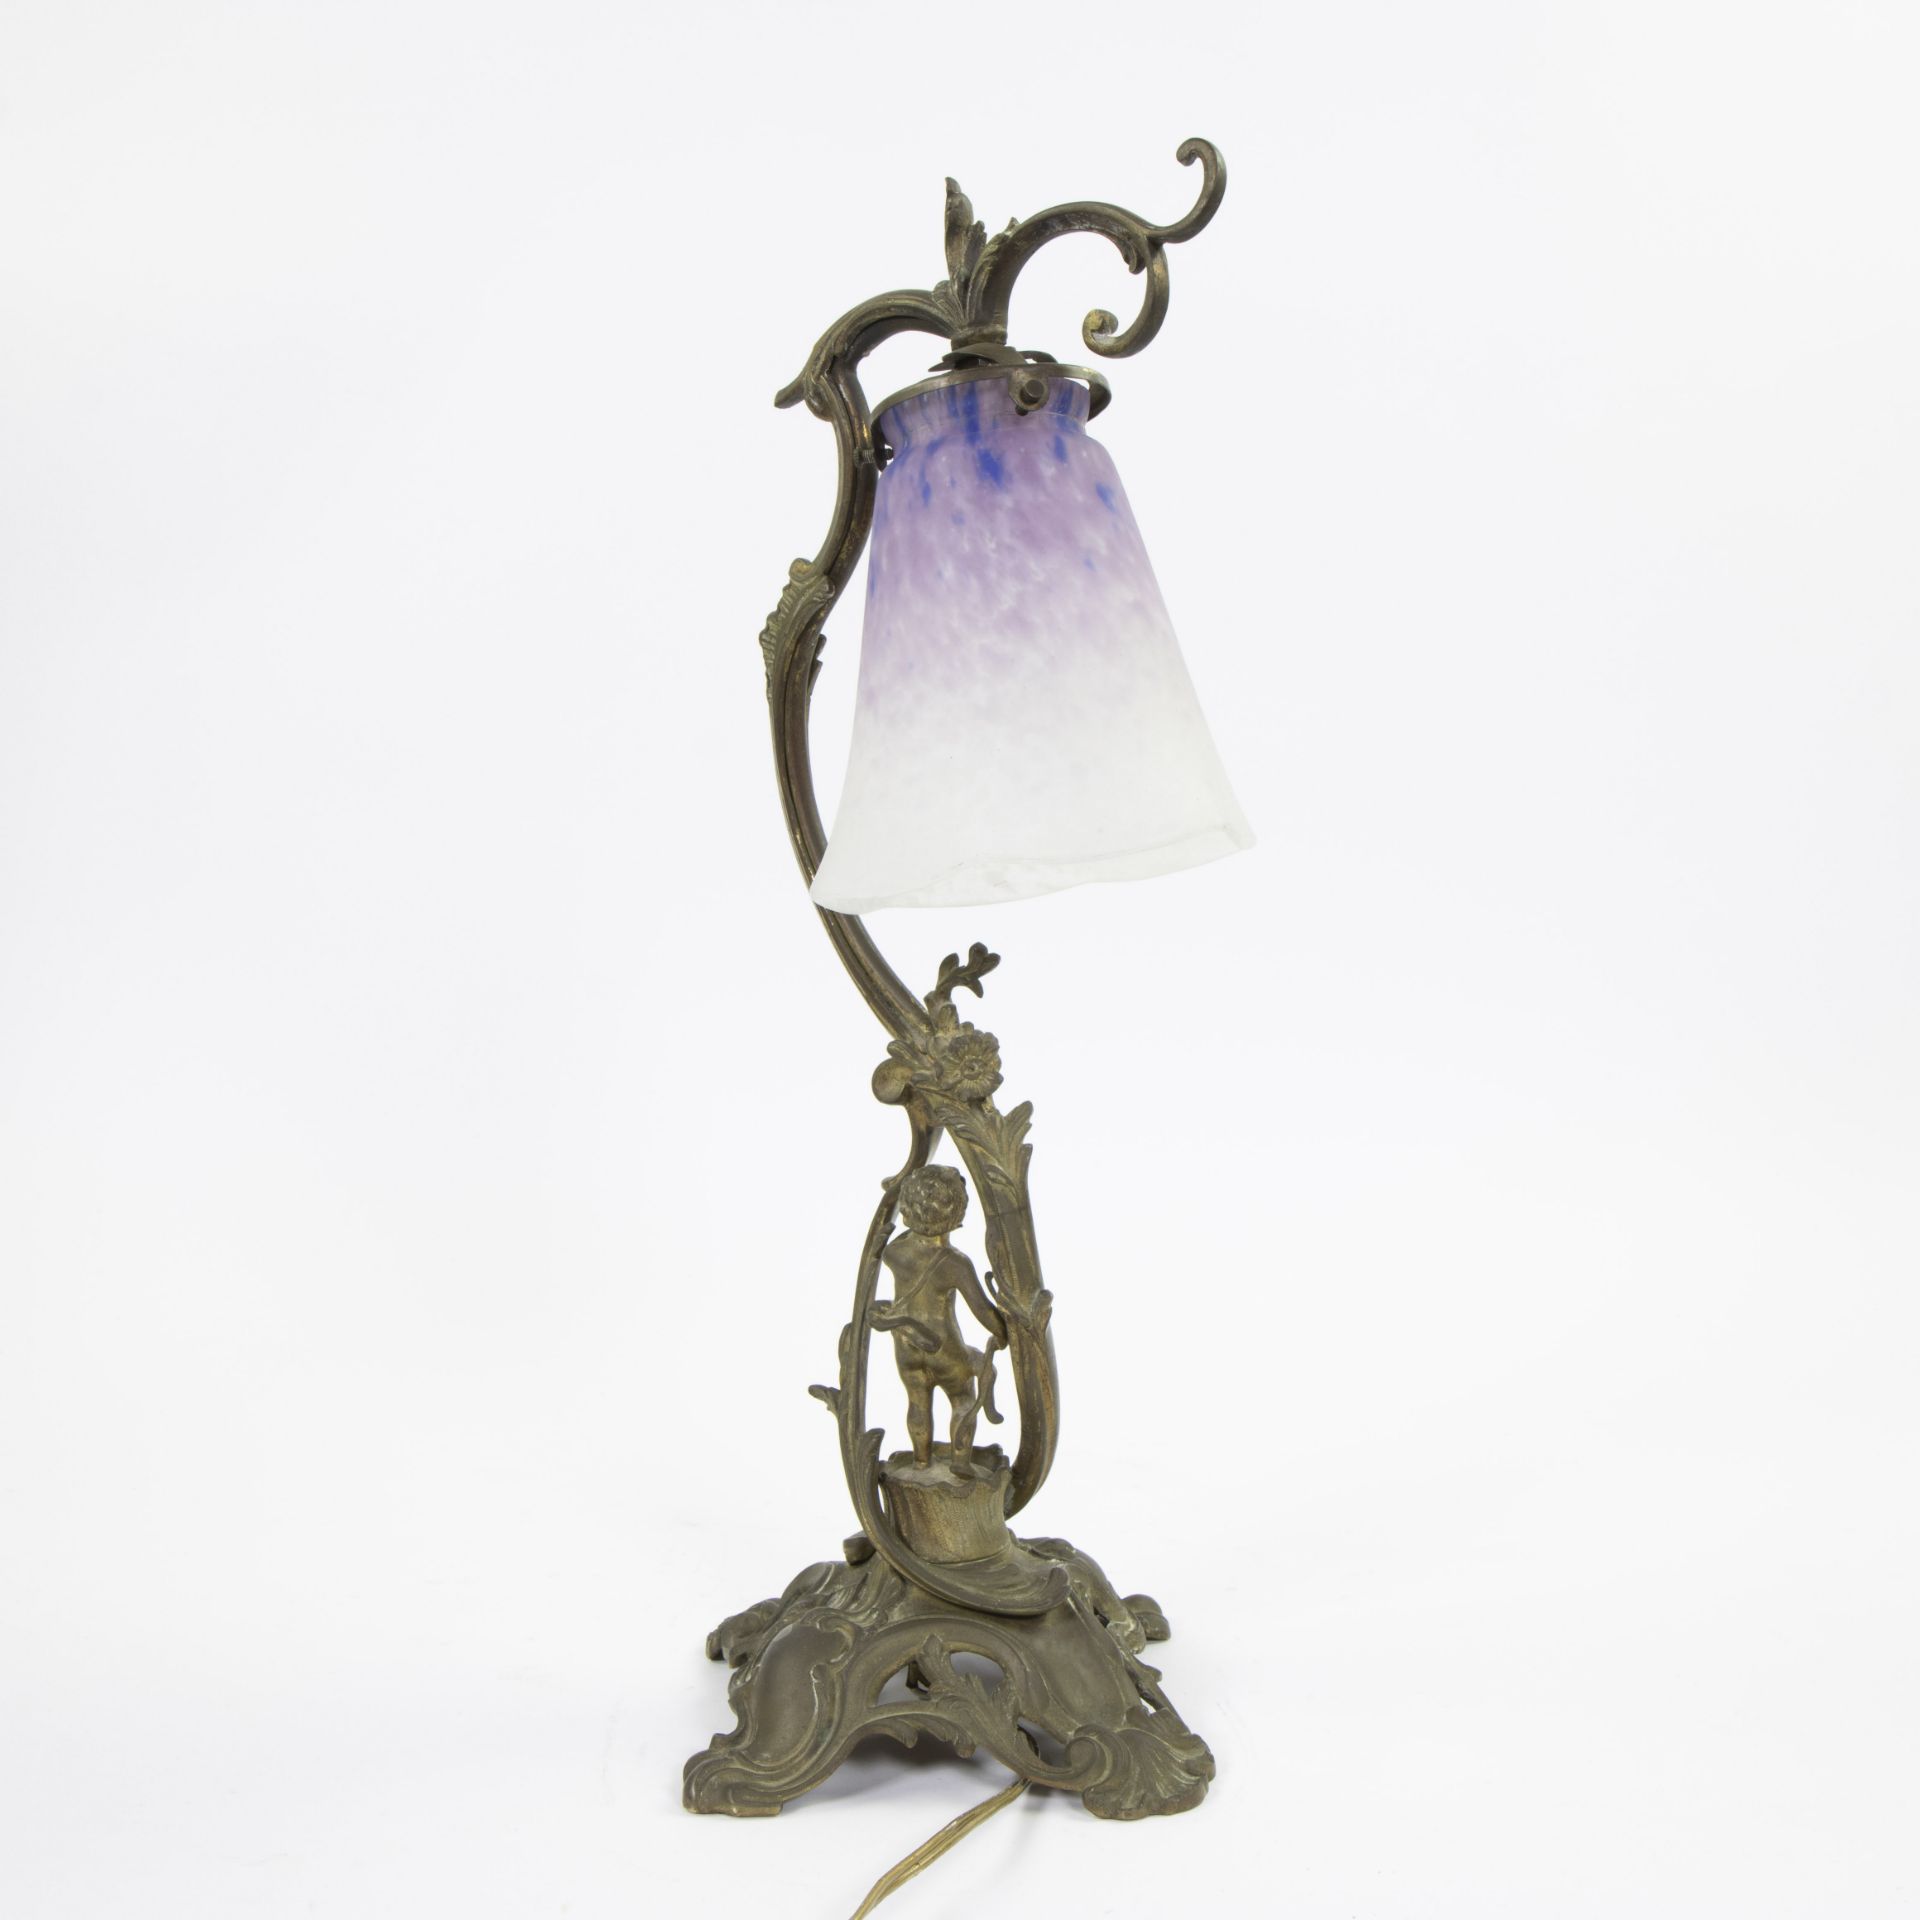 Art Nouveau table lamp in bronze with shade in glass paste Schneider - Image 3 of 4